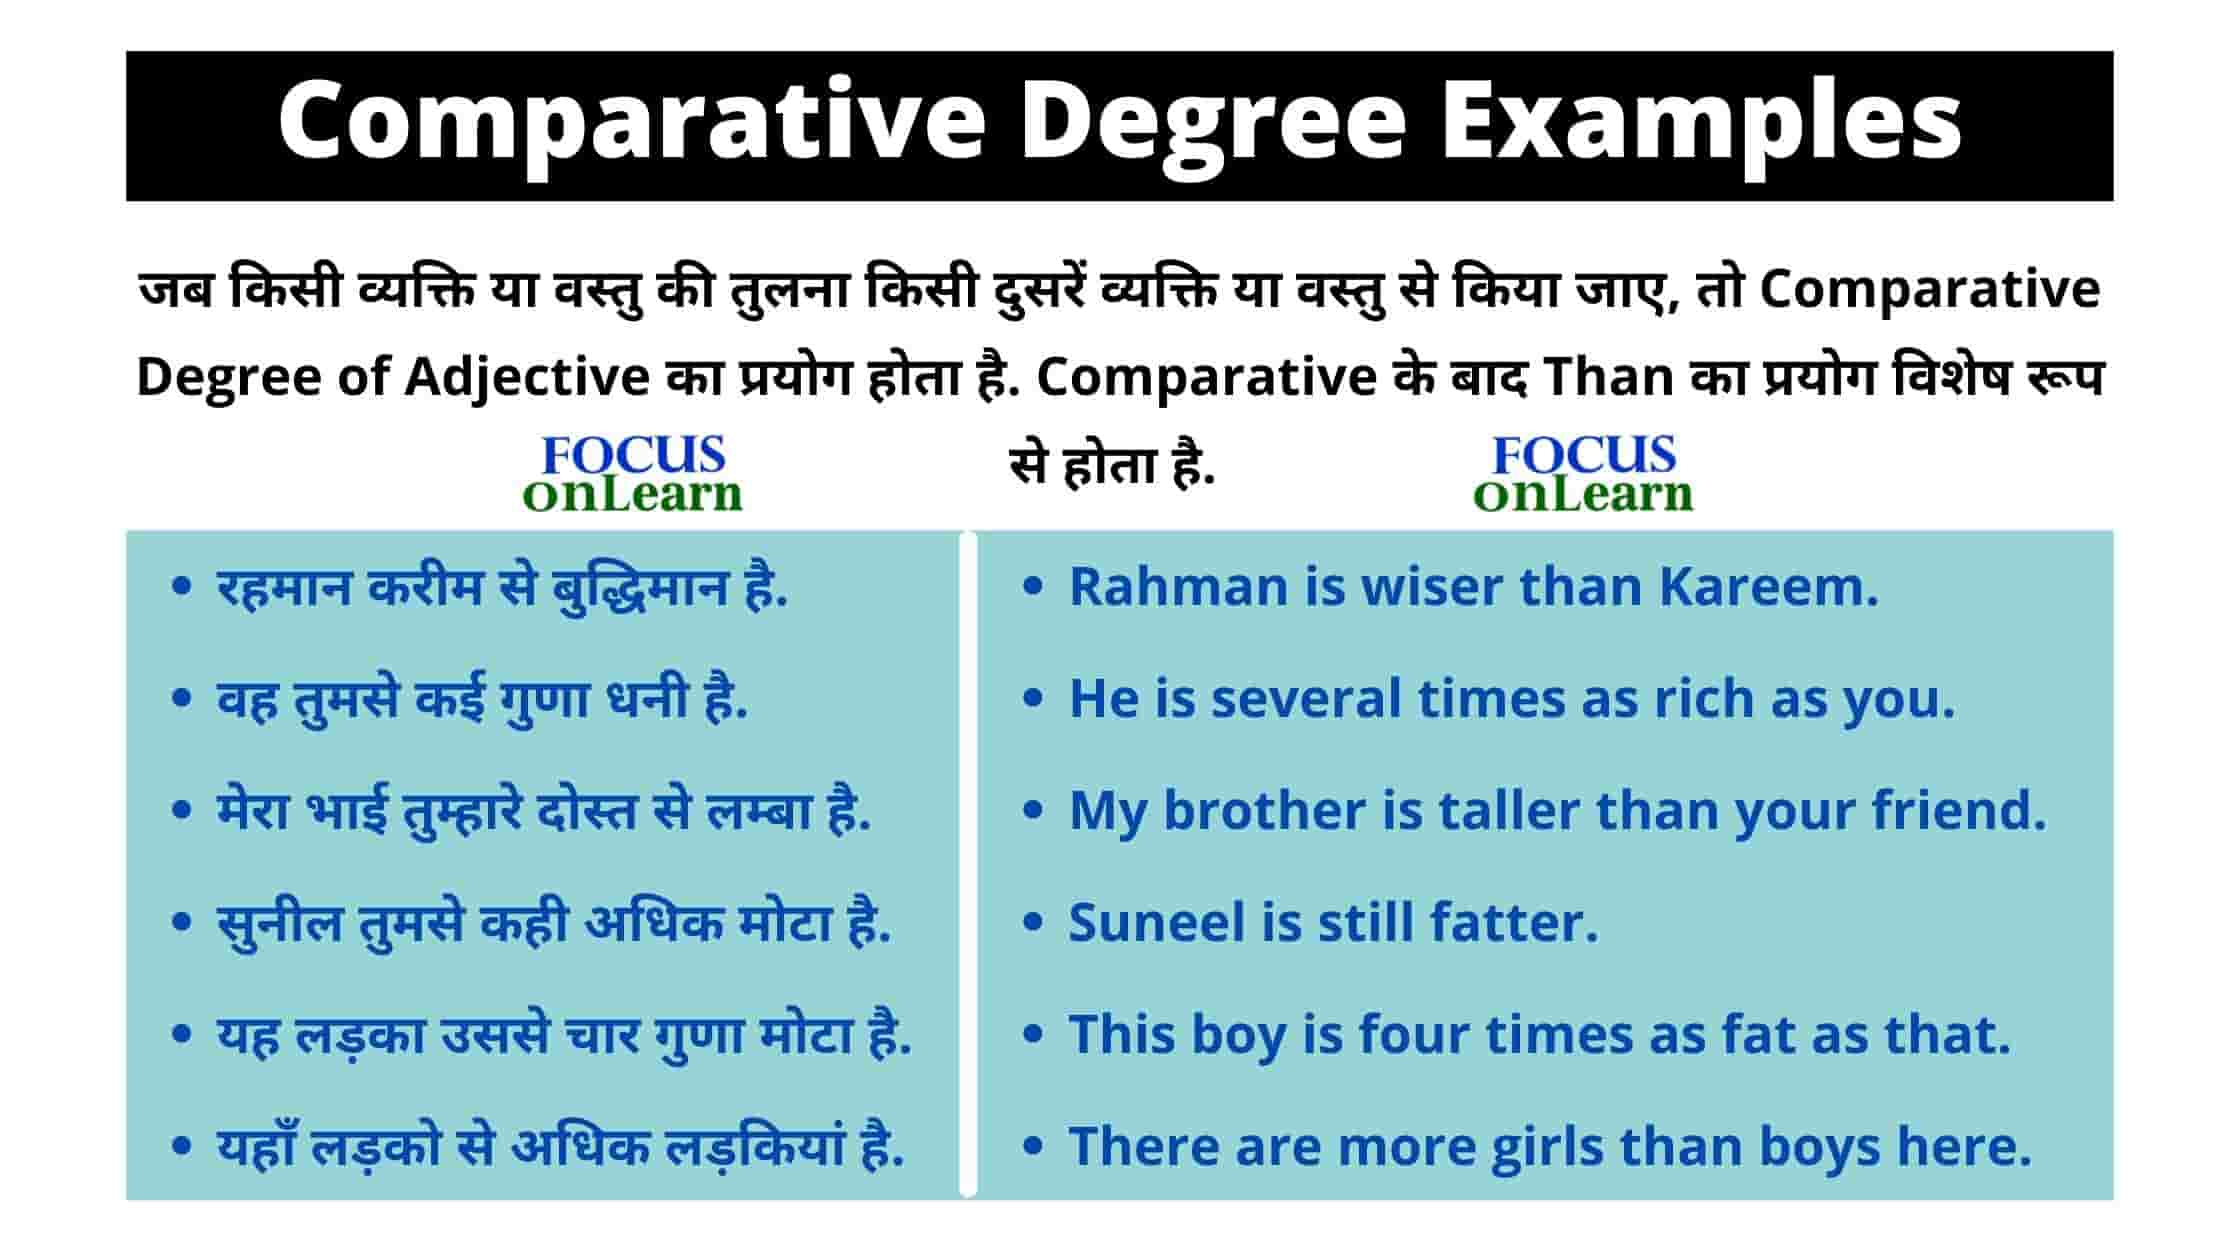 Comparative Degree Examples in Hindi